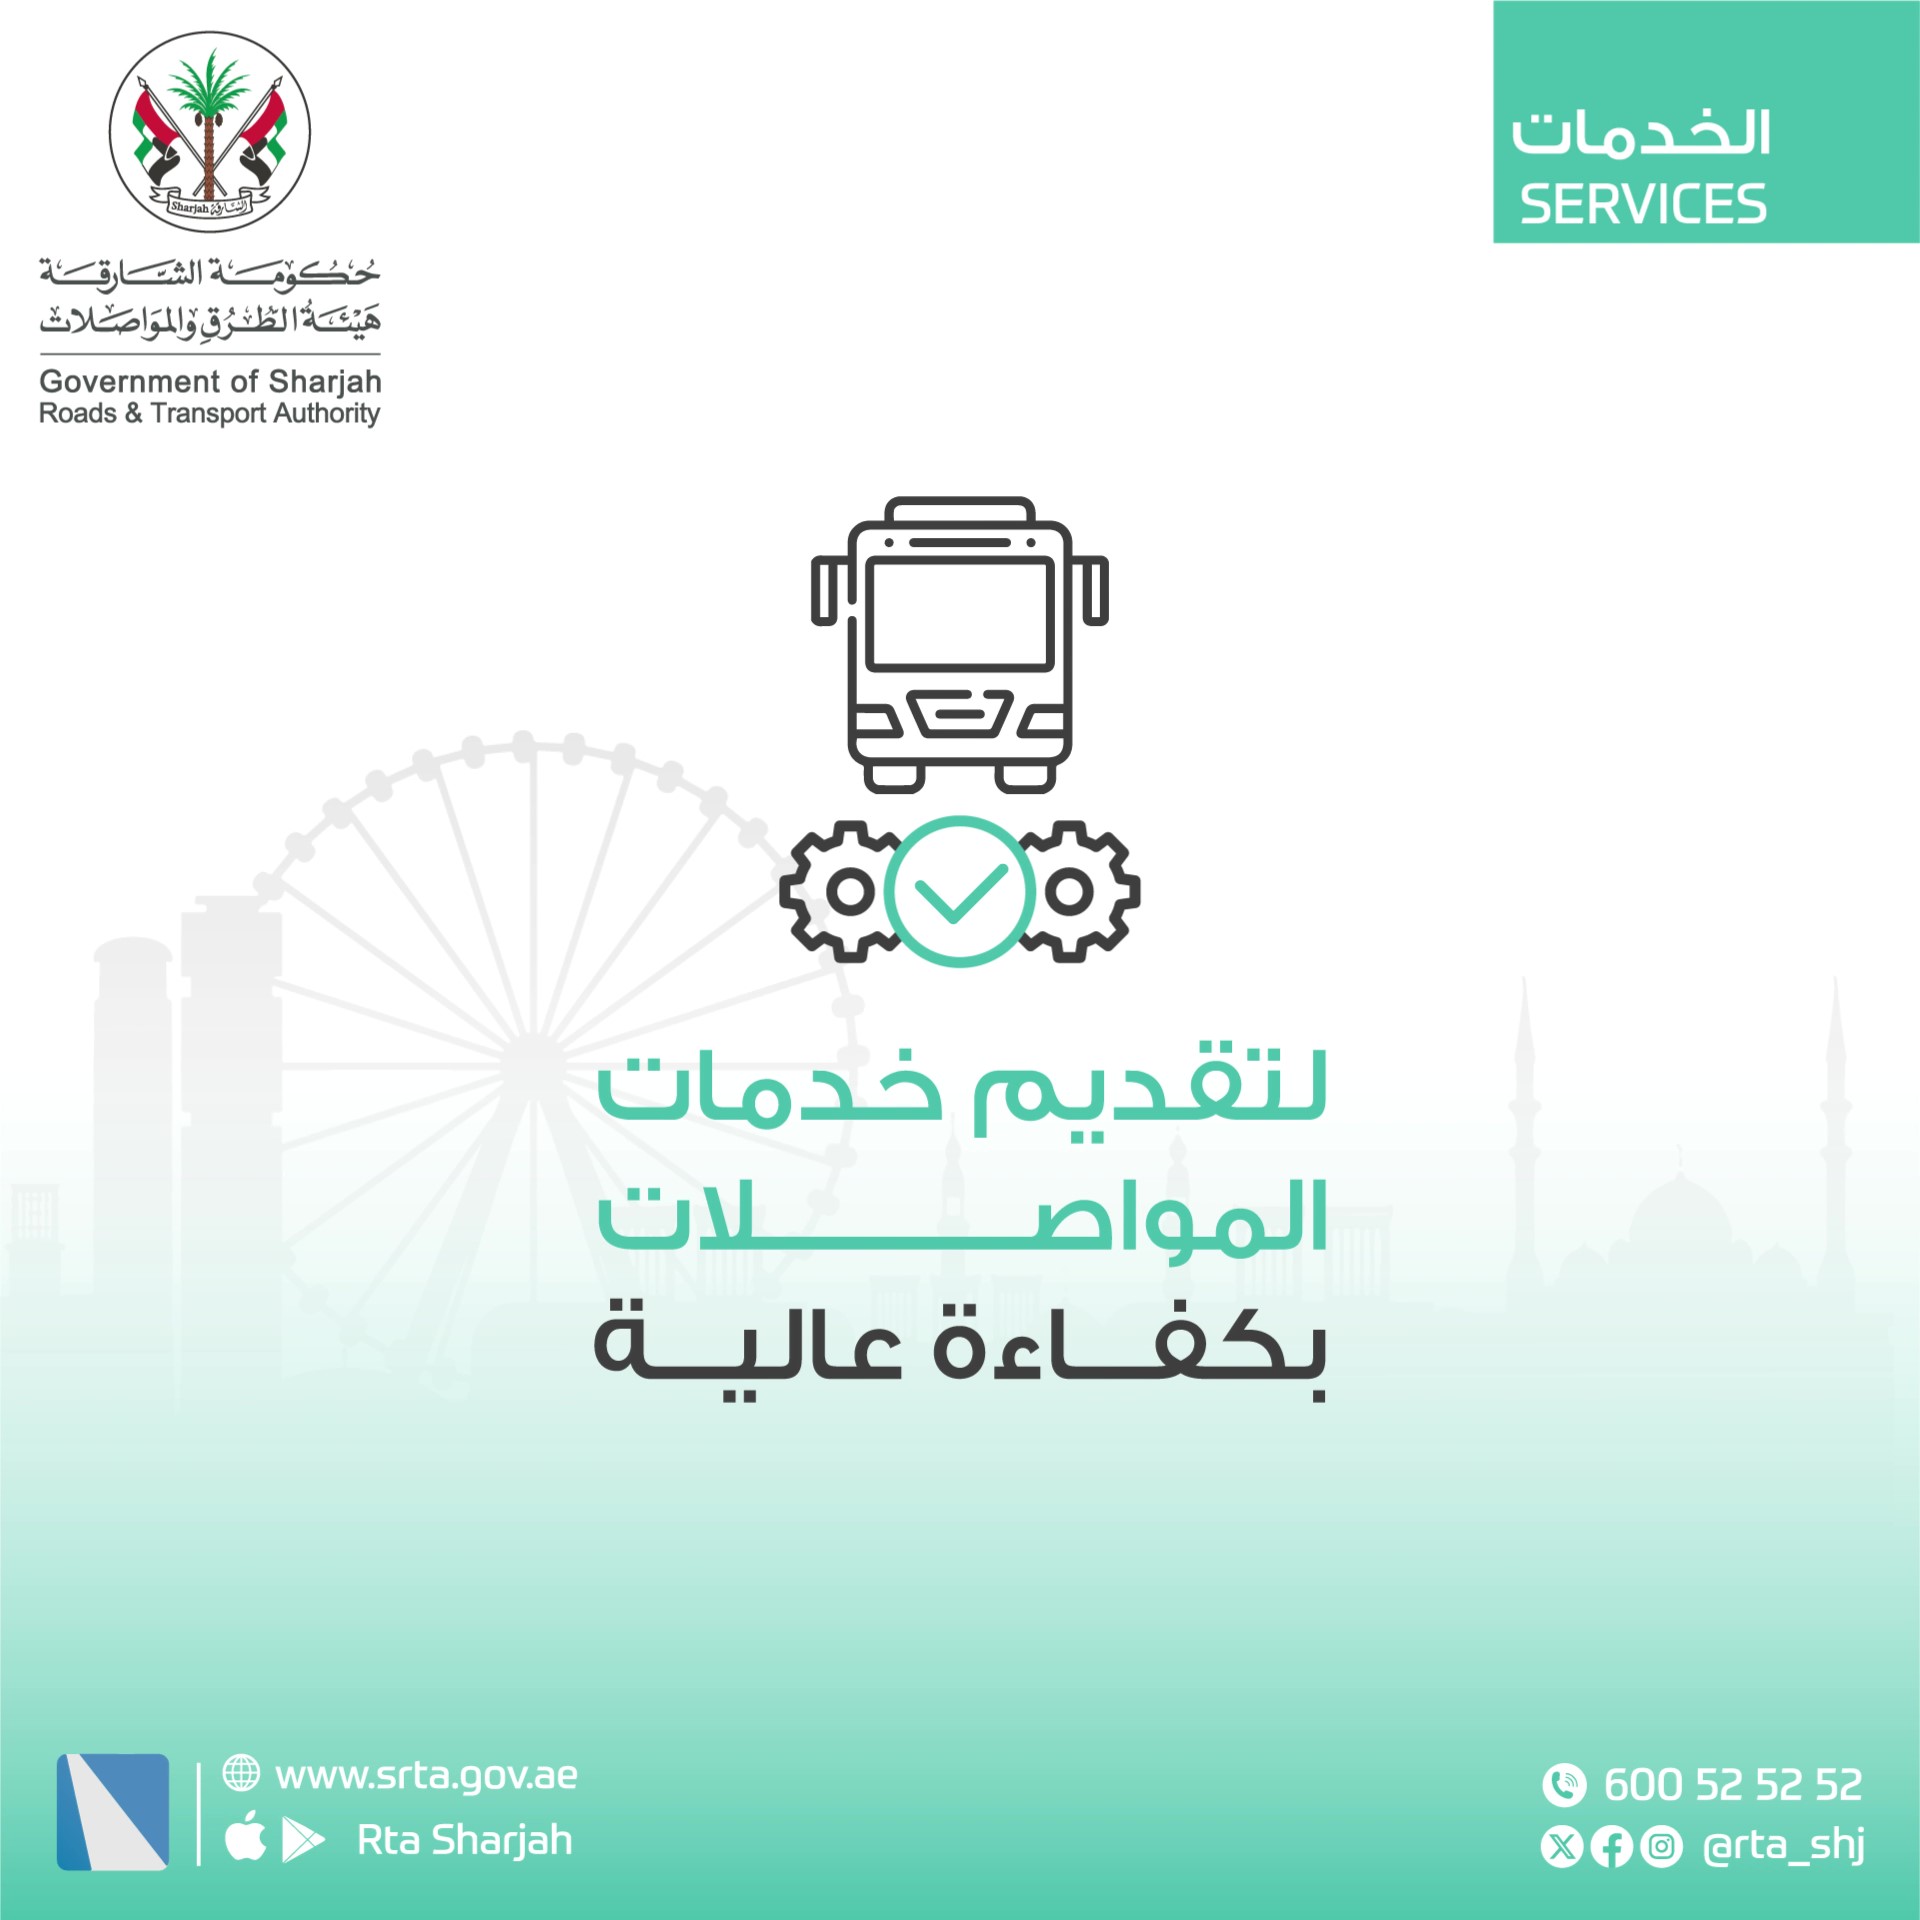 SRTA provides the service 'Renewing a driver’s permit card for transportation companies affiliated with the Sharjah Emirate.'